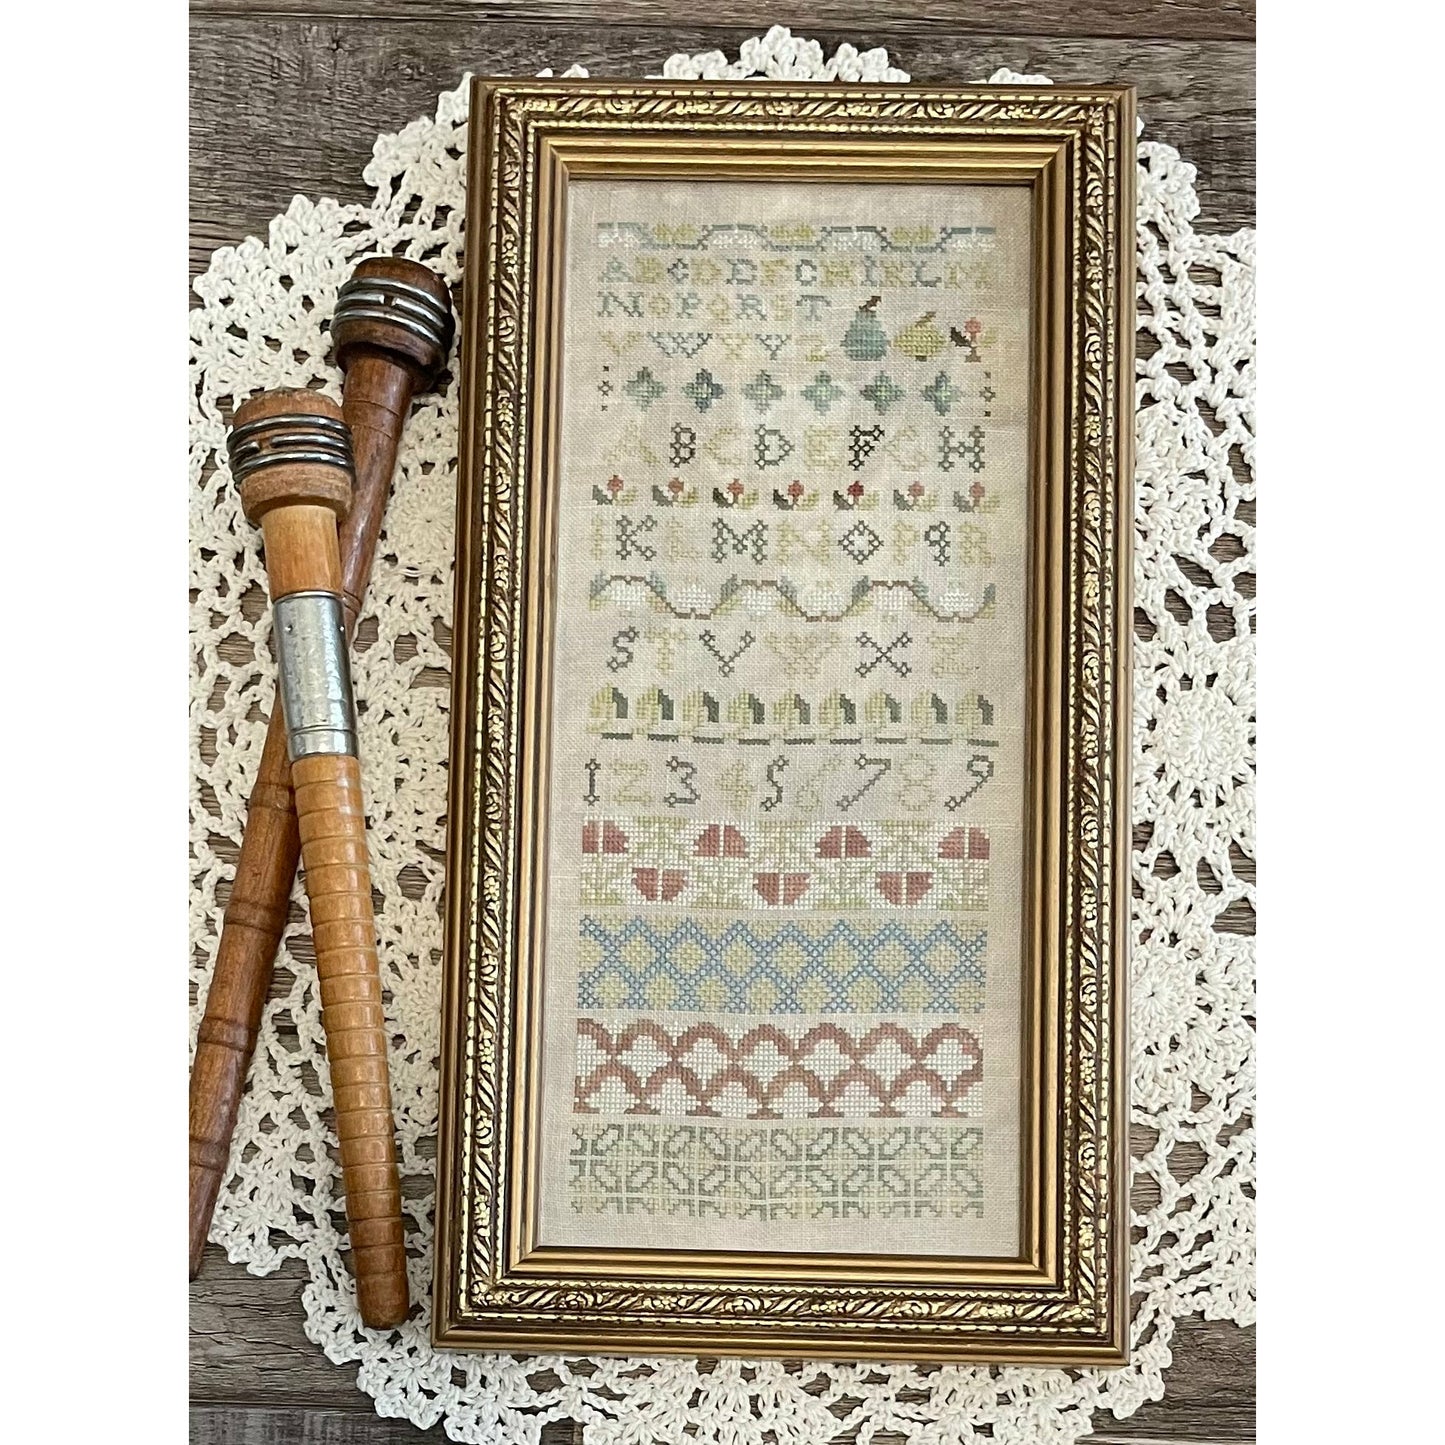 From the Heart ~ The Green Pear Band Sampler Pattern